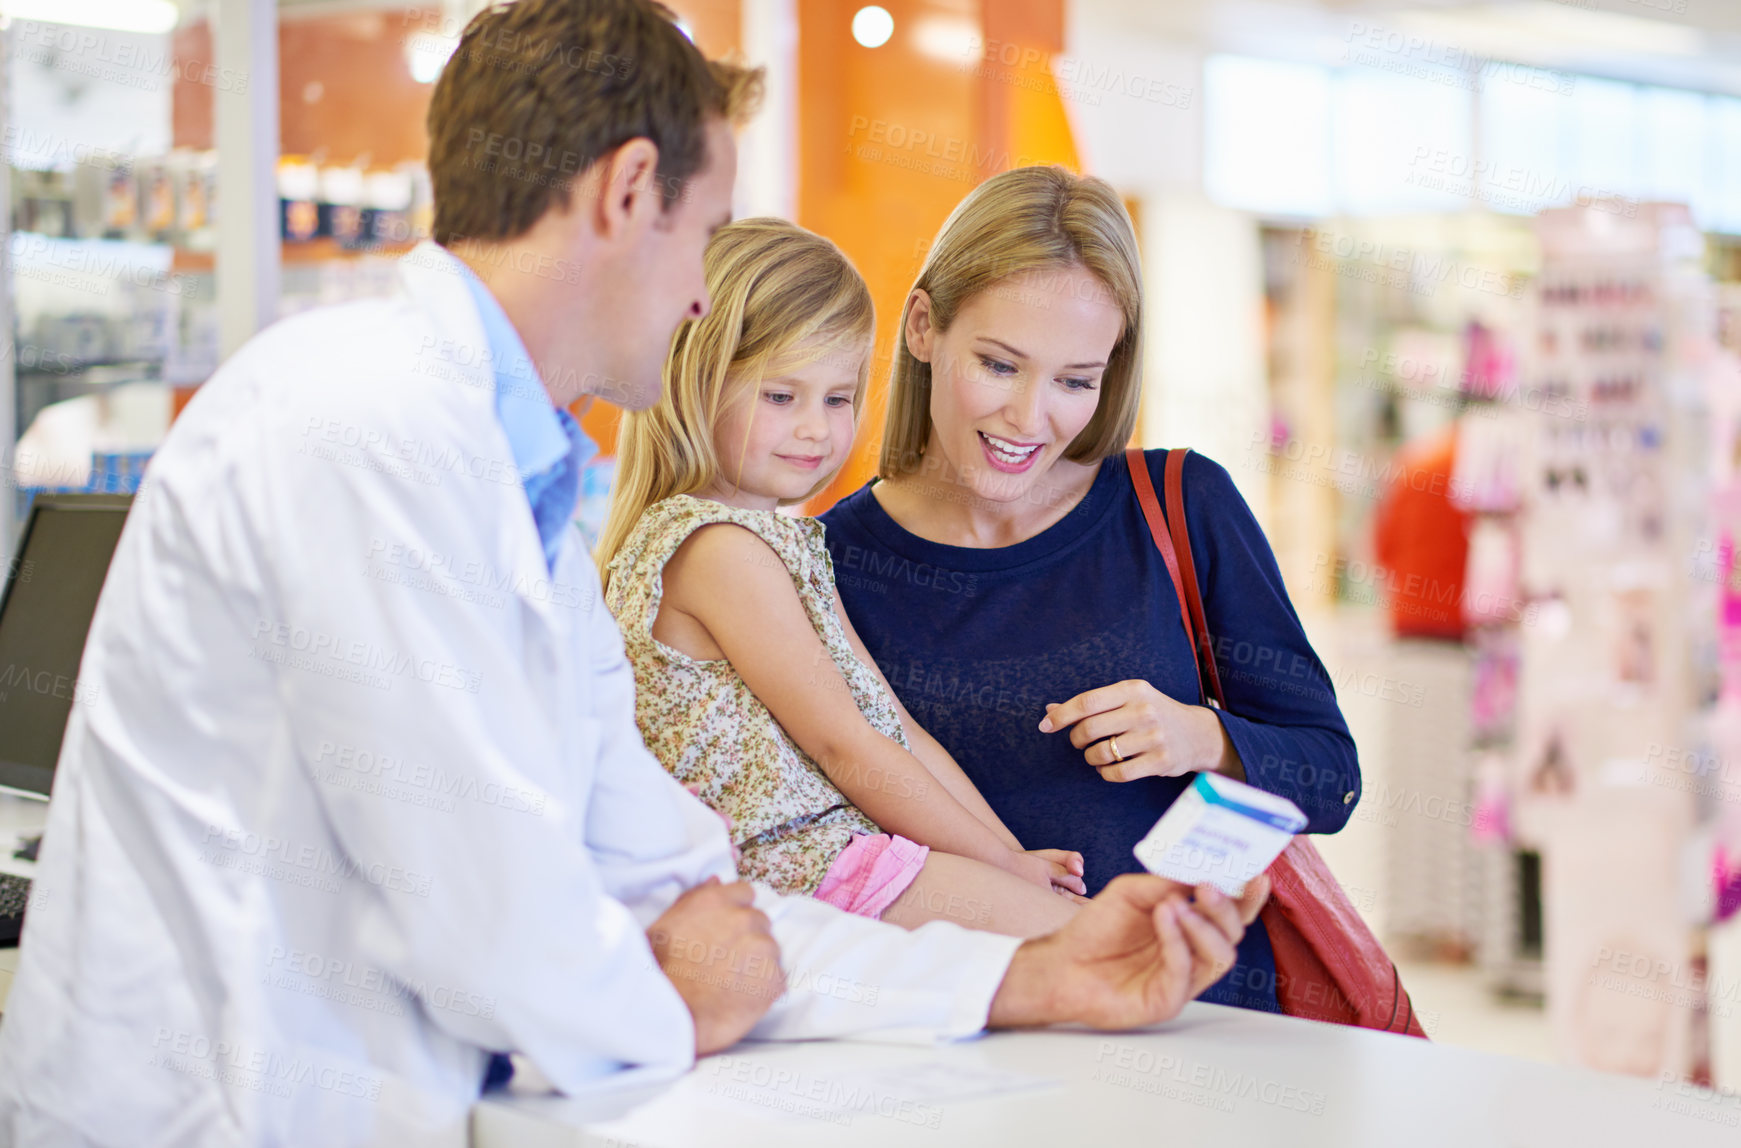 Buy stock photo A pharmacist giving medication to a mother and daughter